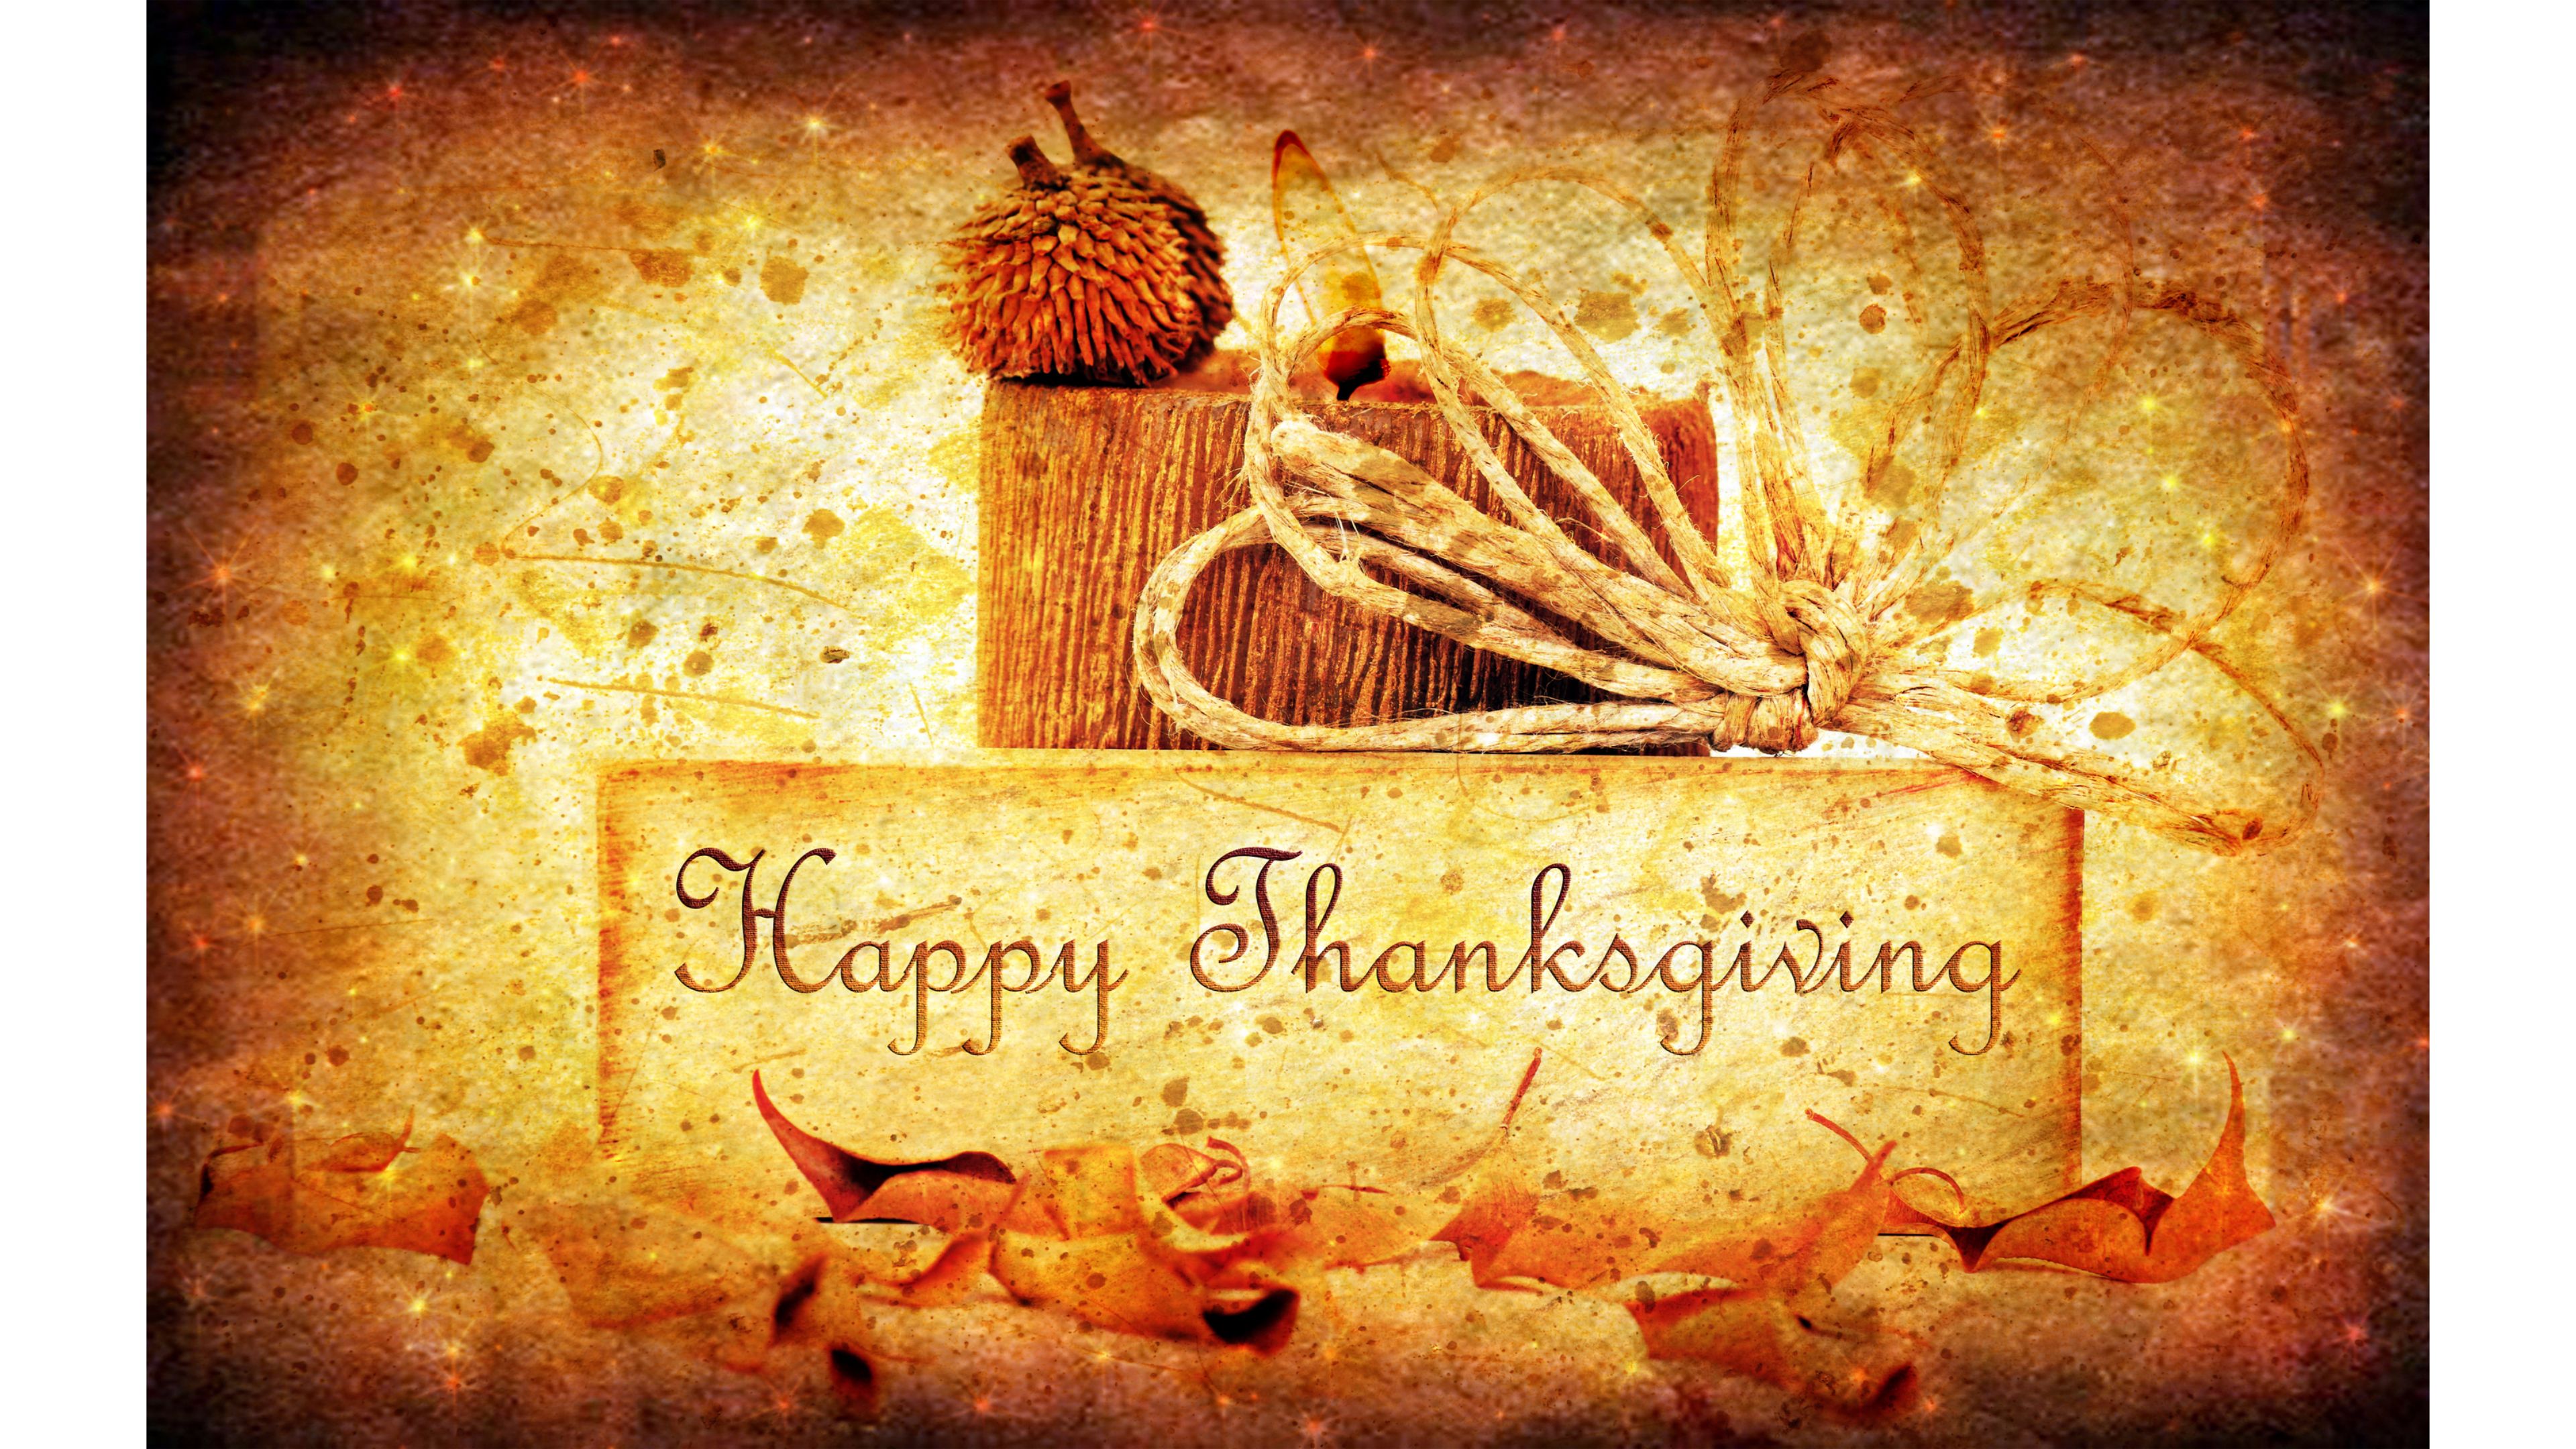 Thanksgiving 4K wallpaper for your desktop or mobile screen free and easy to download